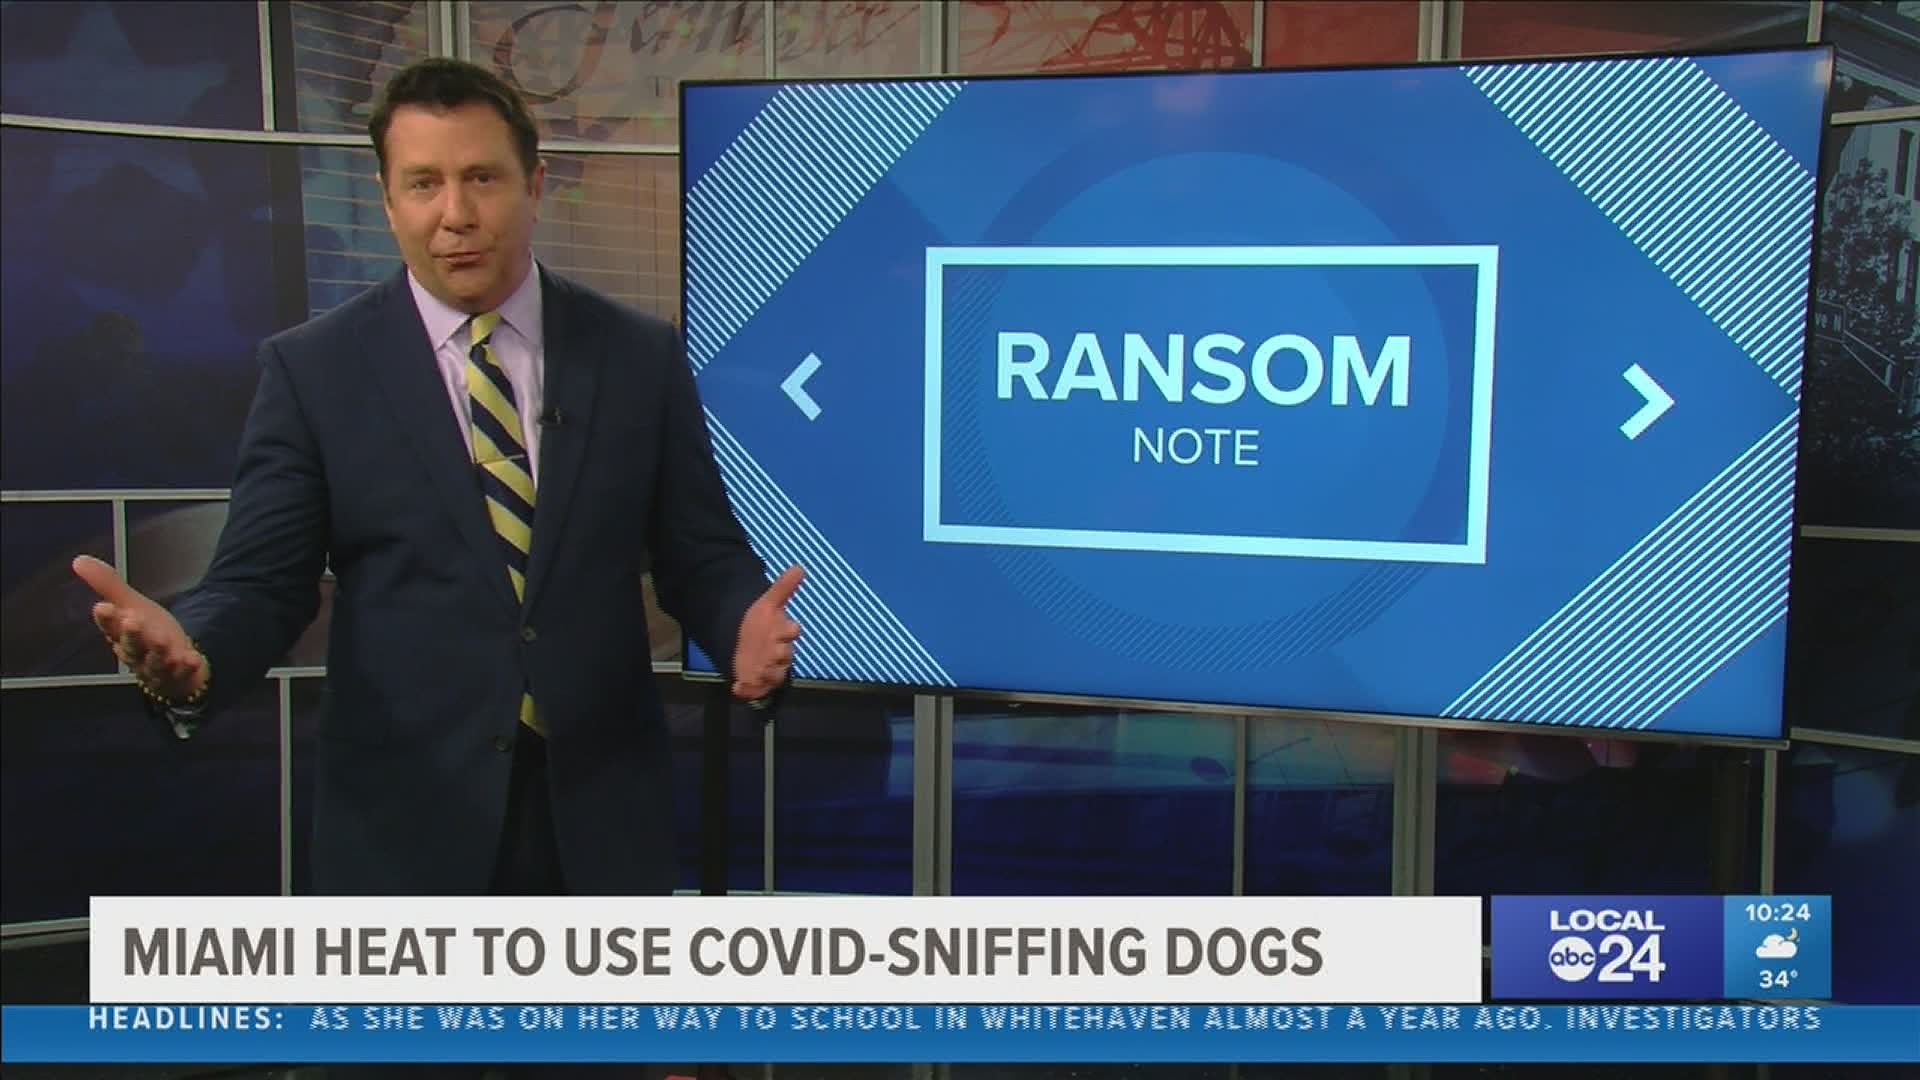 Local 24 News Anchor Richard Ransom discusses in his Ransom Note about the Miami Heat now using COVID-sniffing dogs to screen fans into the arena.